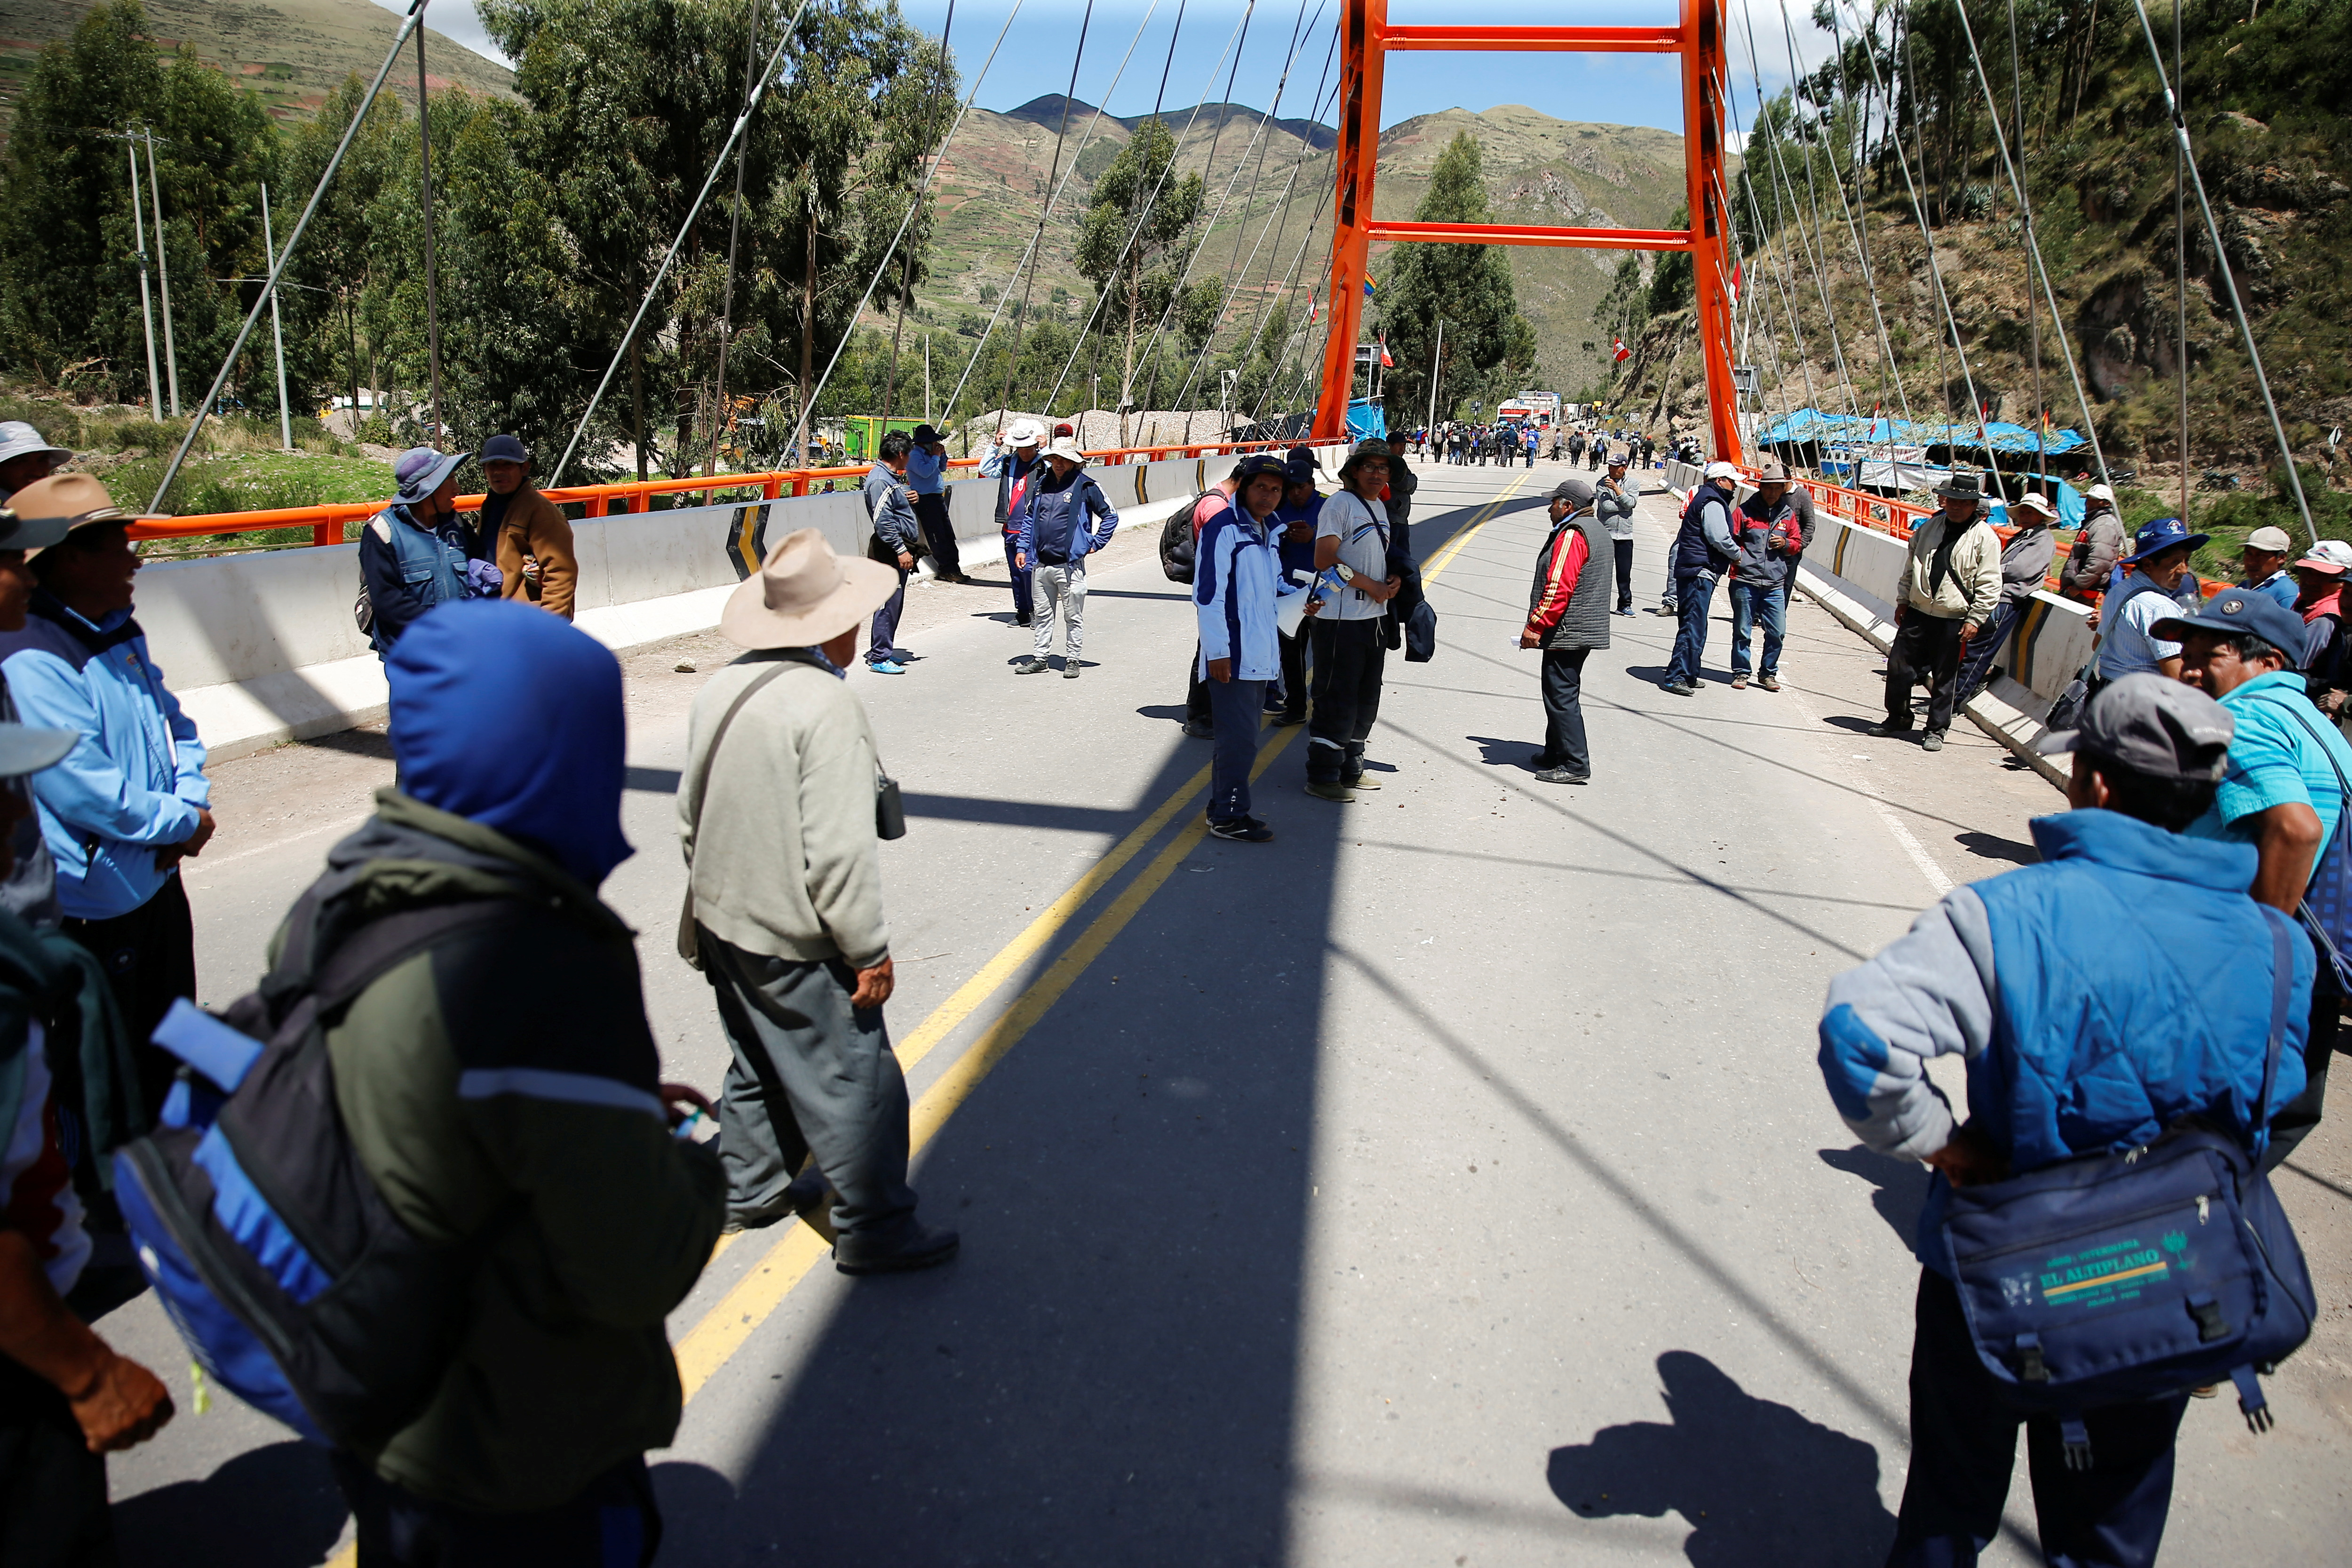 Peruvian demonstrators protest demanding early elections and the release of Peruvian ousted leader Pedro Castillo on a highway blockade, in Cusco, Peru January 7, 2023. REUTERS/Hugo Courotto NO RESALES. NO ARCHIVES